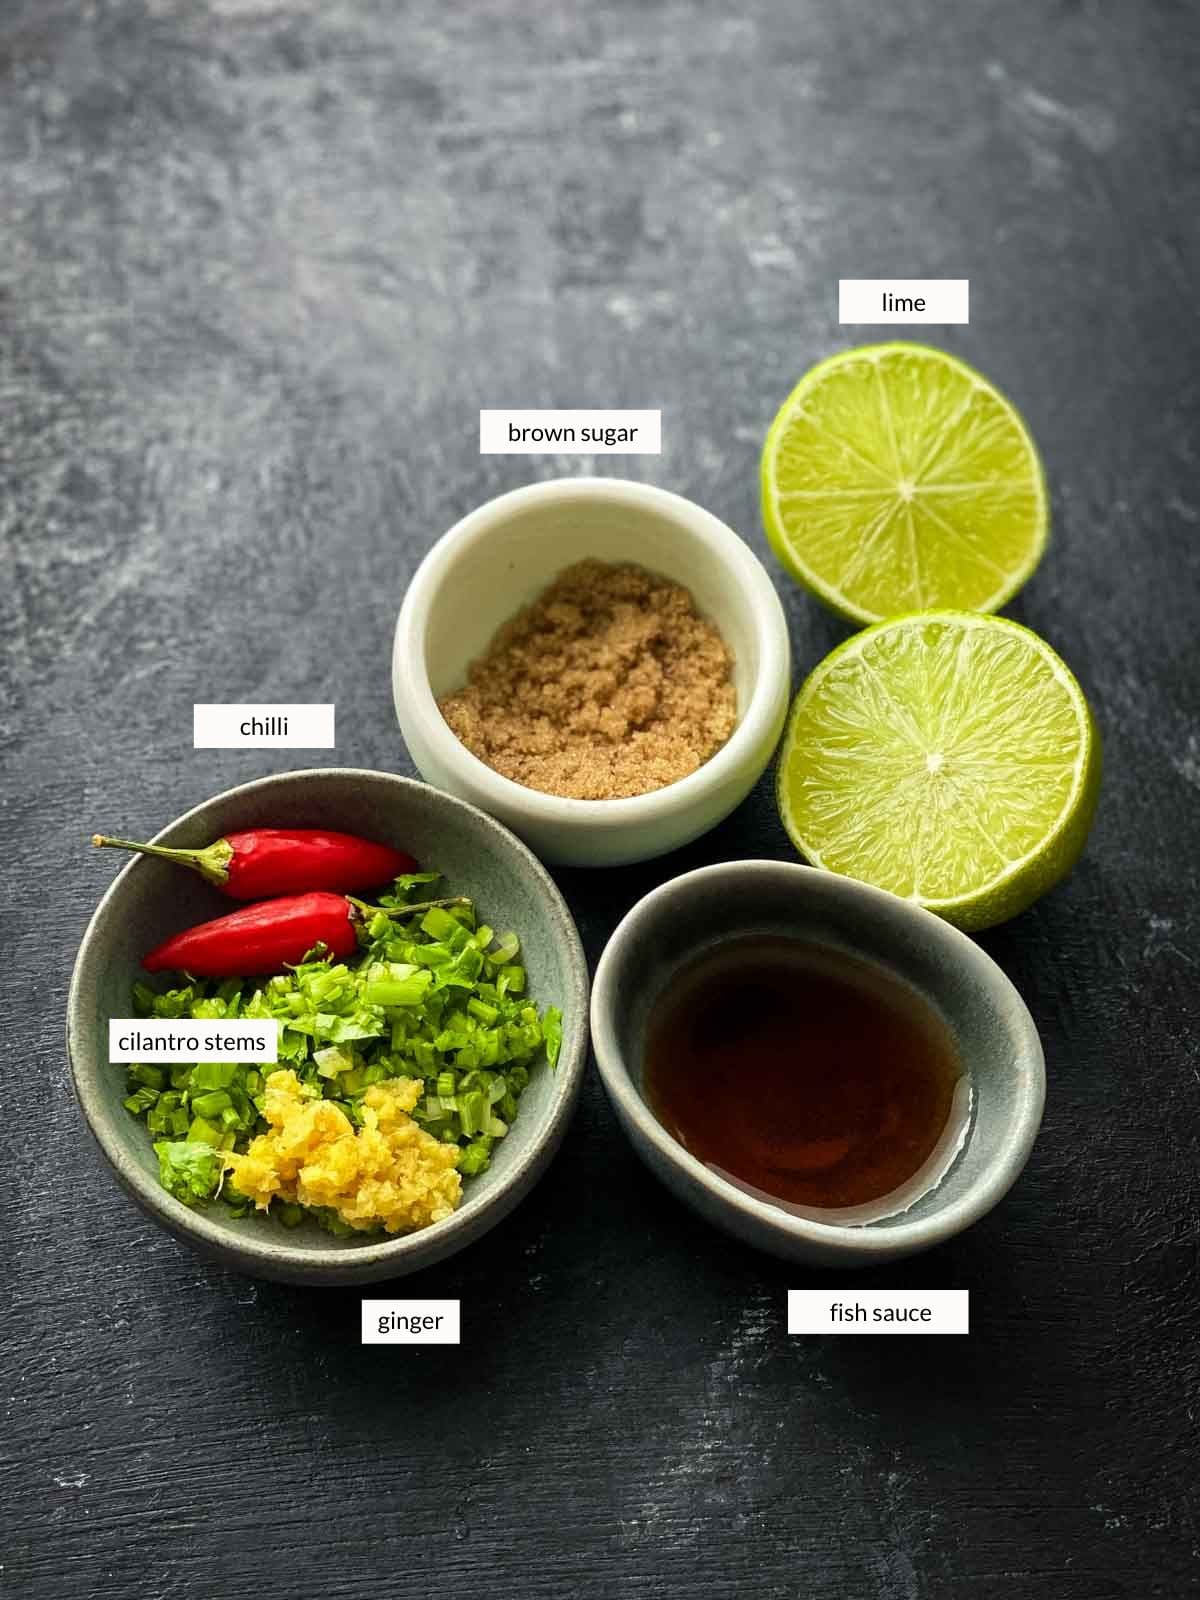 wombok salad dressing ingredients including chilli, chopped cilantro stems, grated ginger, brown sugar, fish sauce and lime